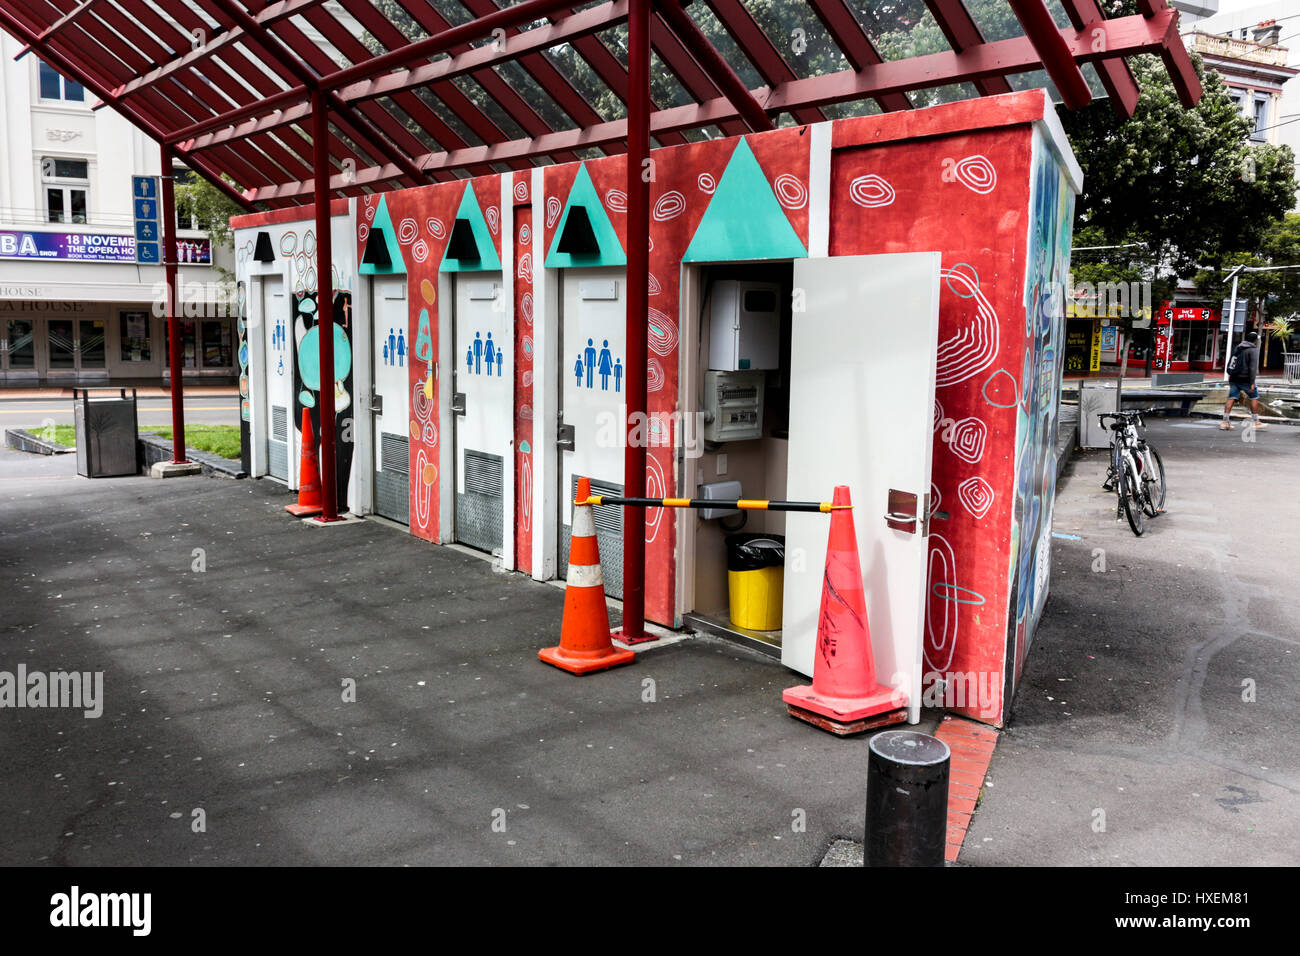 Wellington, New Zealand - February 10, 2017: Colorful painted public toilets on the street in Wellington. Stock Photo